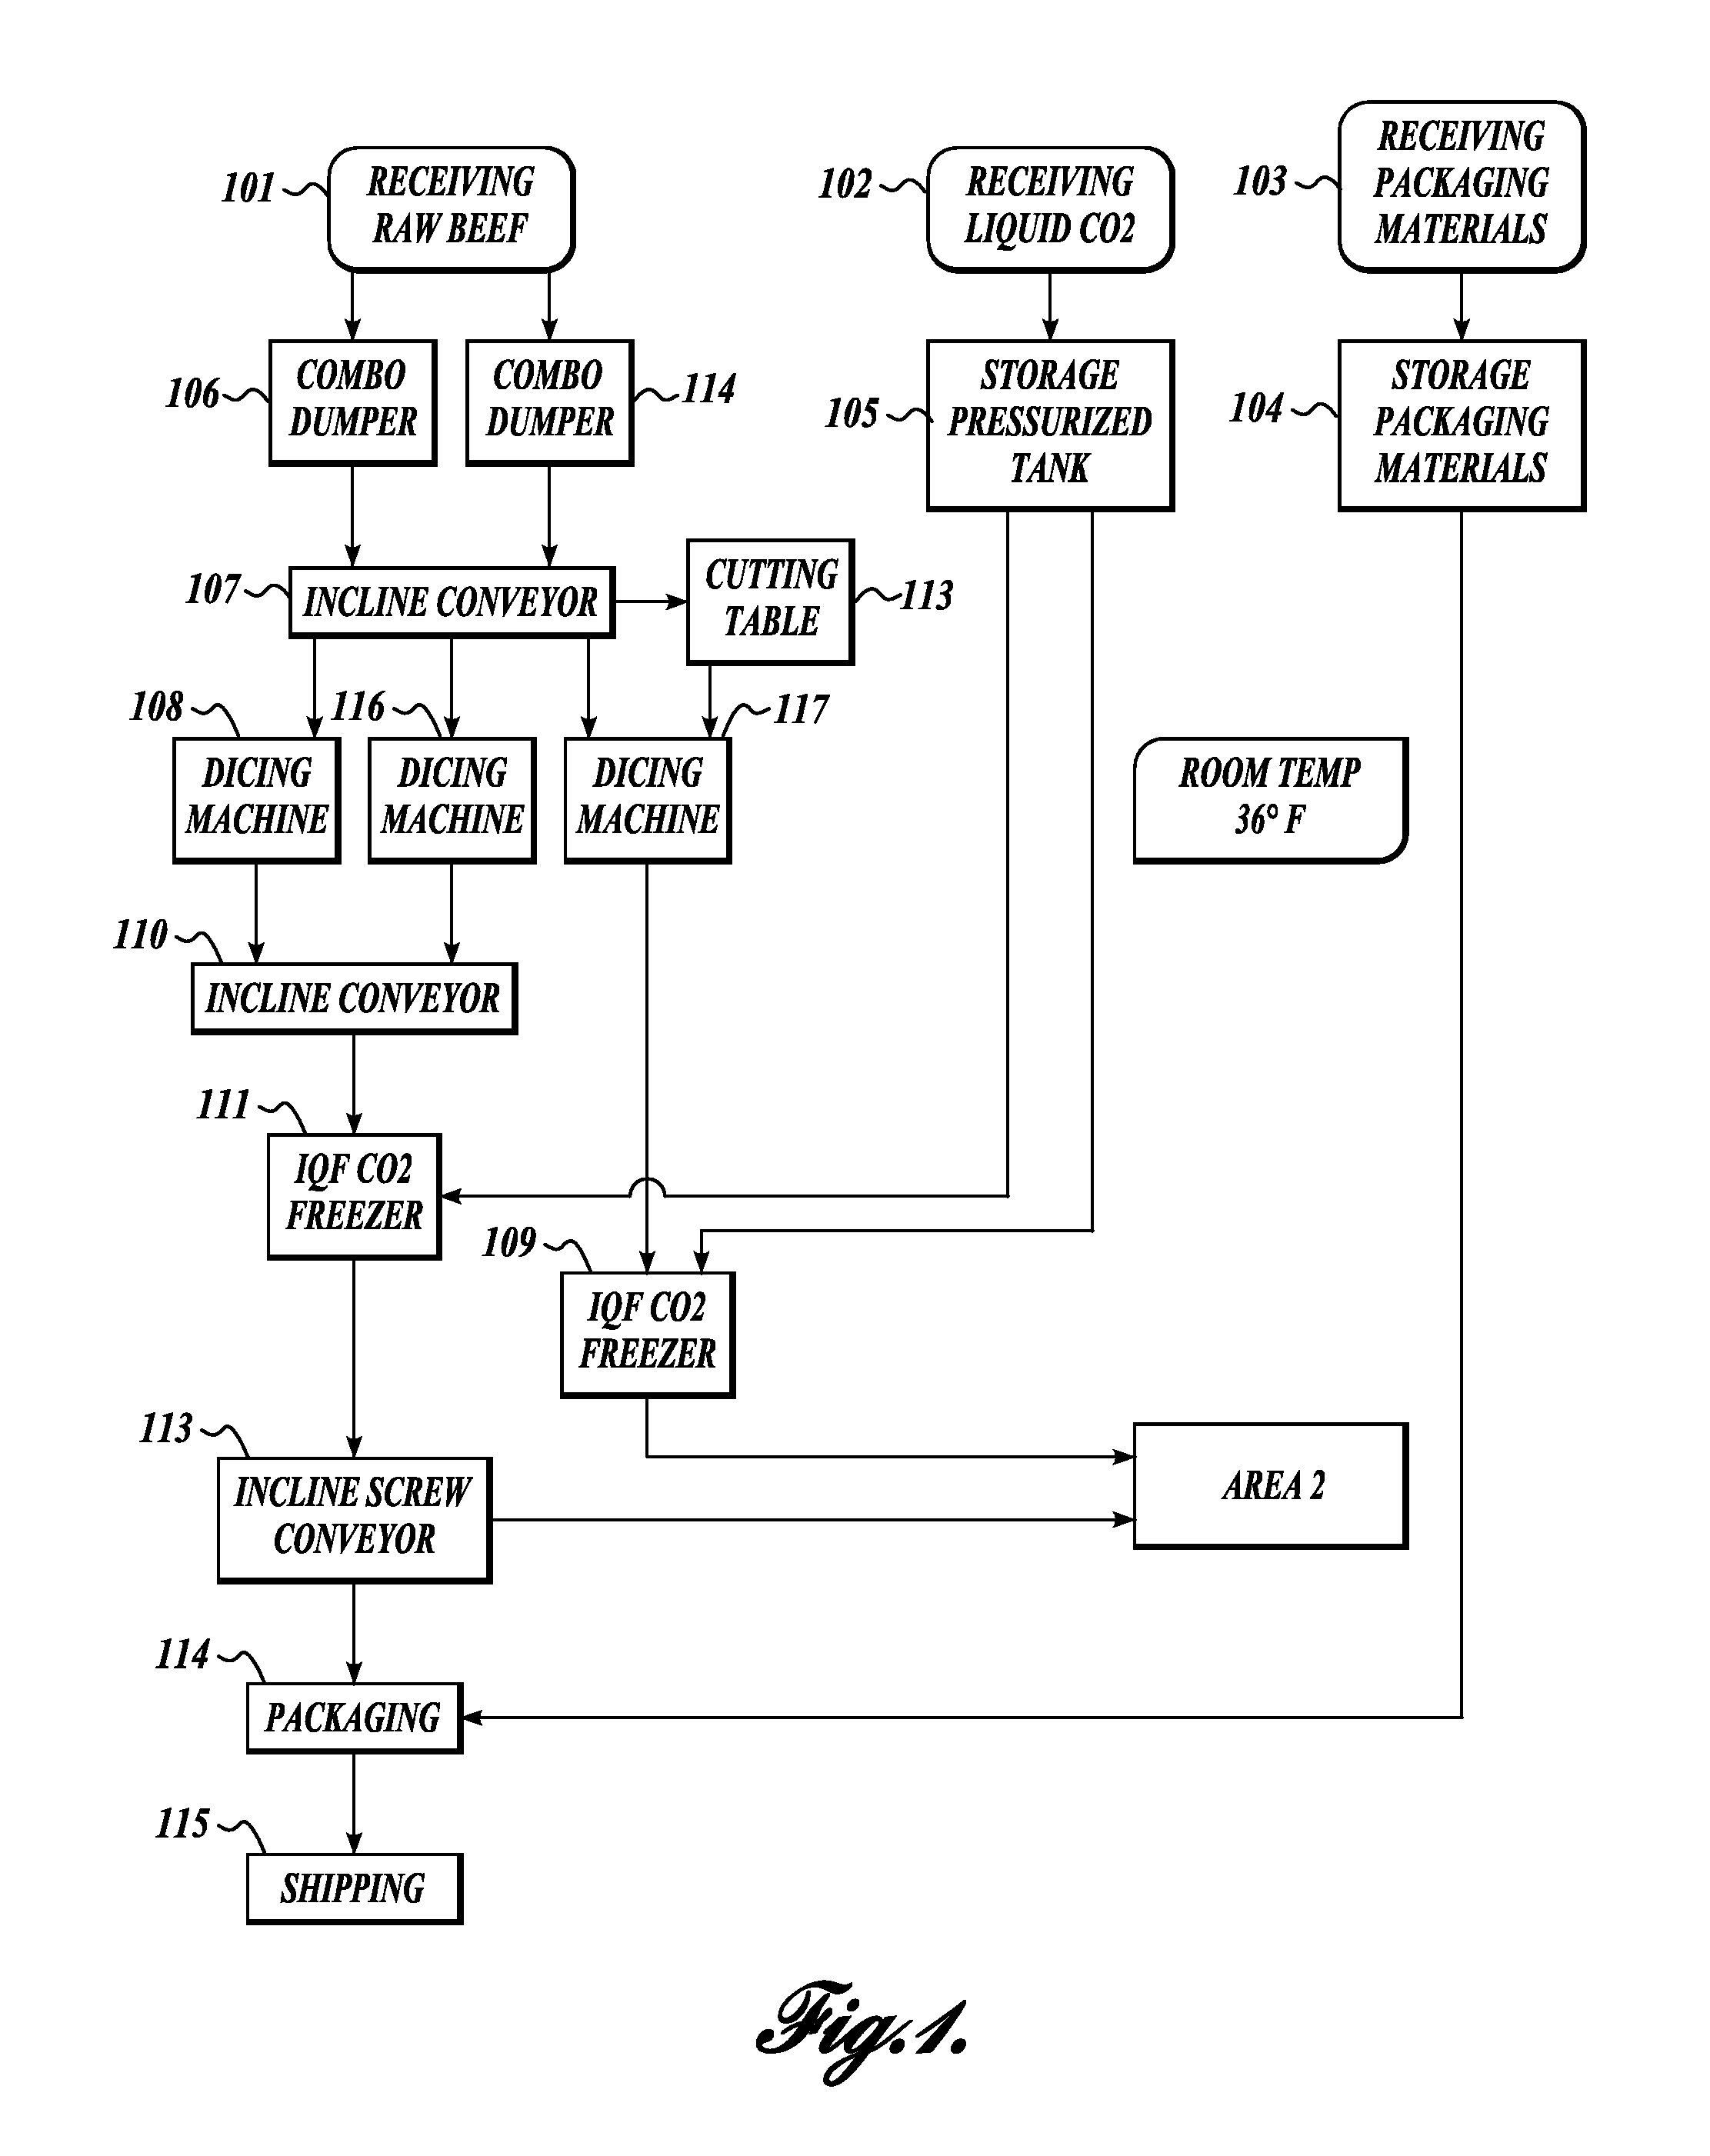 Method for separating bone fragments and tallow from a single ingredient stream of beef by controlling the frozen condition of the beef and immersing in carbonic acid at elevated pressures